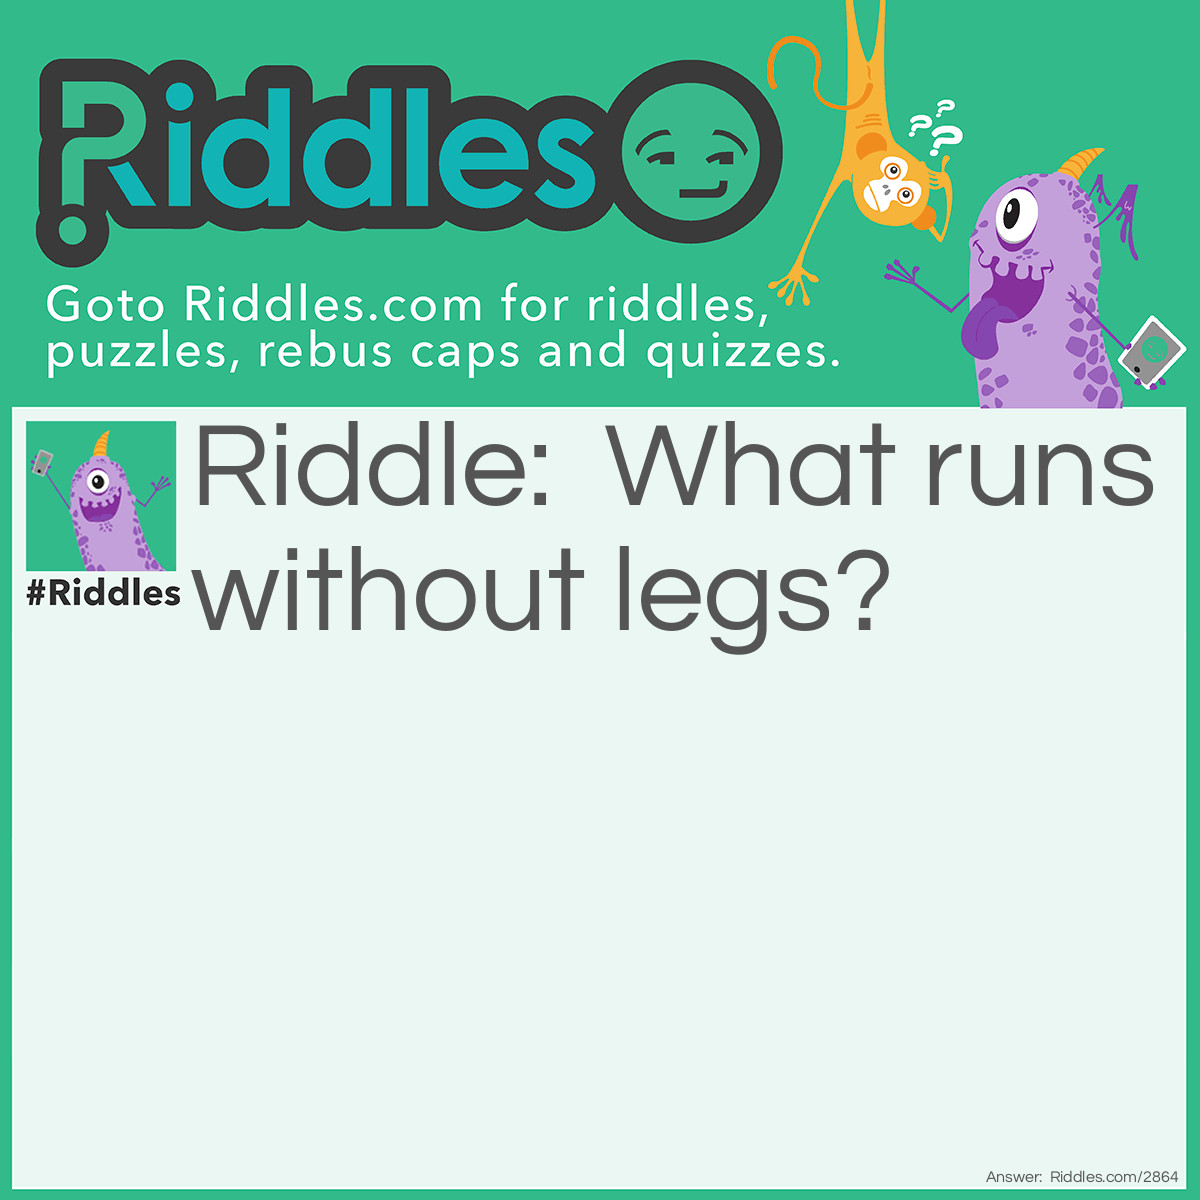 Riddle: What runs without legs? Answer: Water.